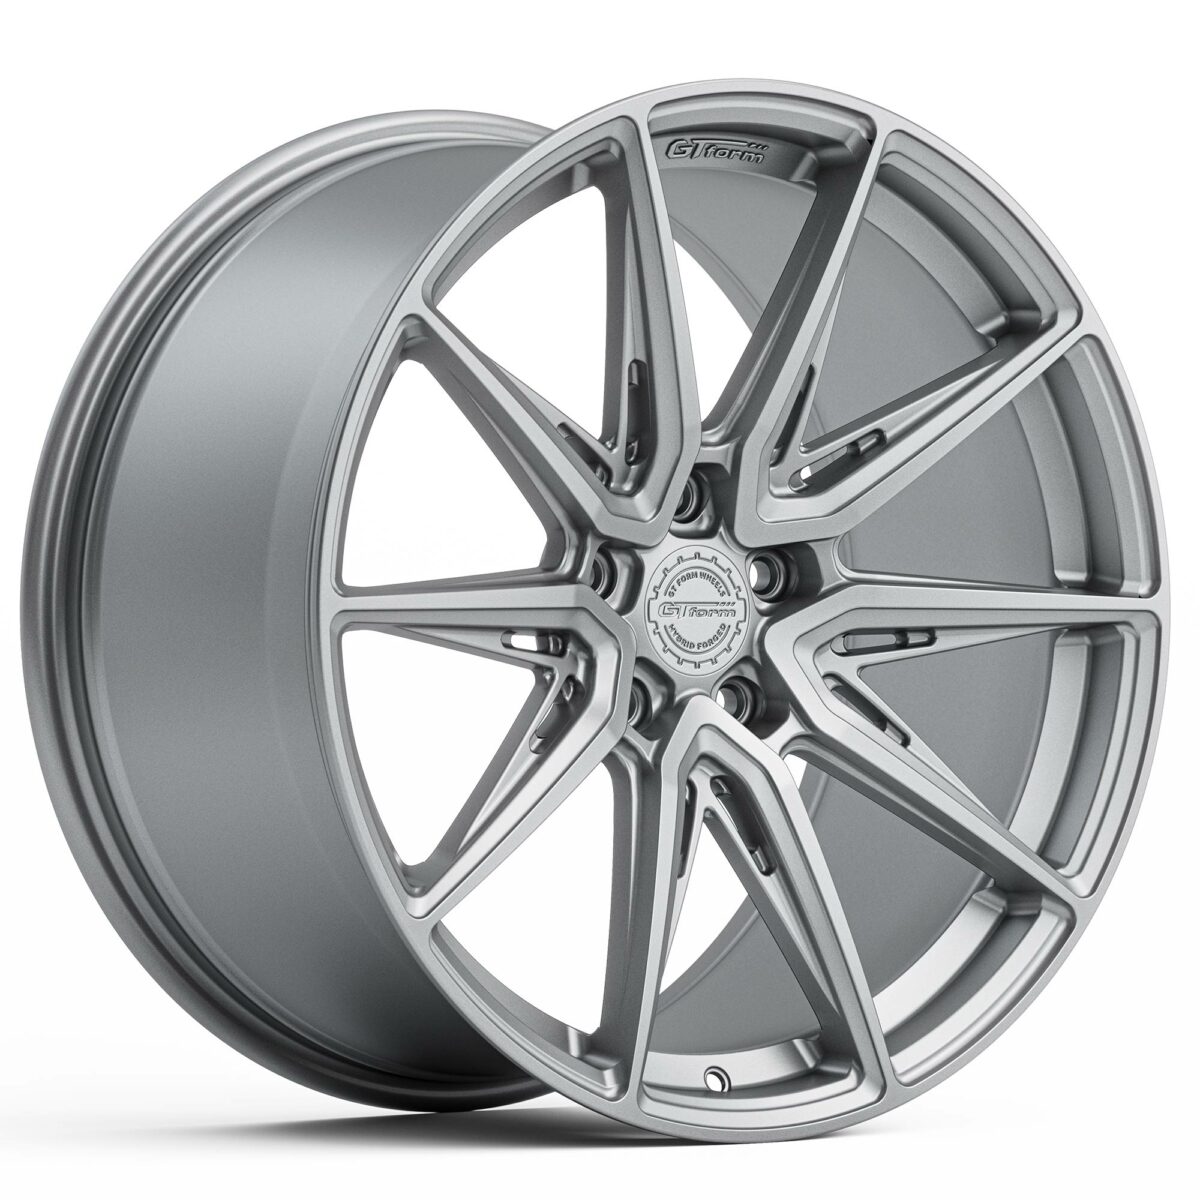 PERFORMANCE WHEELS GT FORM HF4.1 HYBRID FORGED GLOSS SILVER 20X9 20X10.5 20X12 STAGGERED RIMS